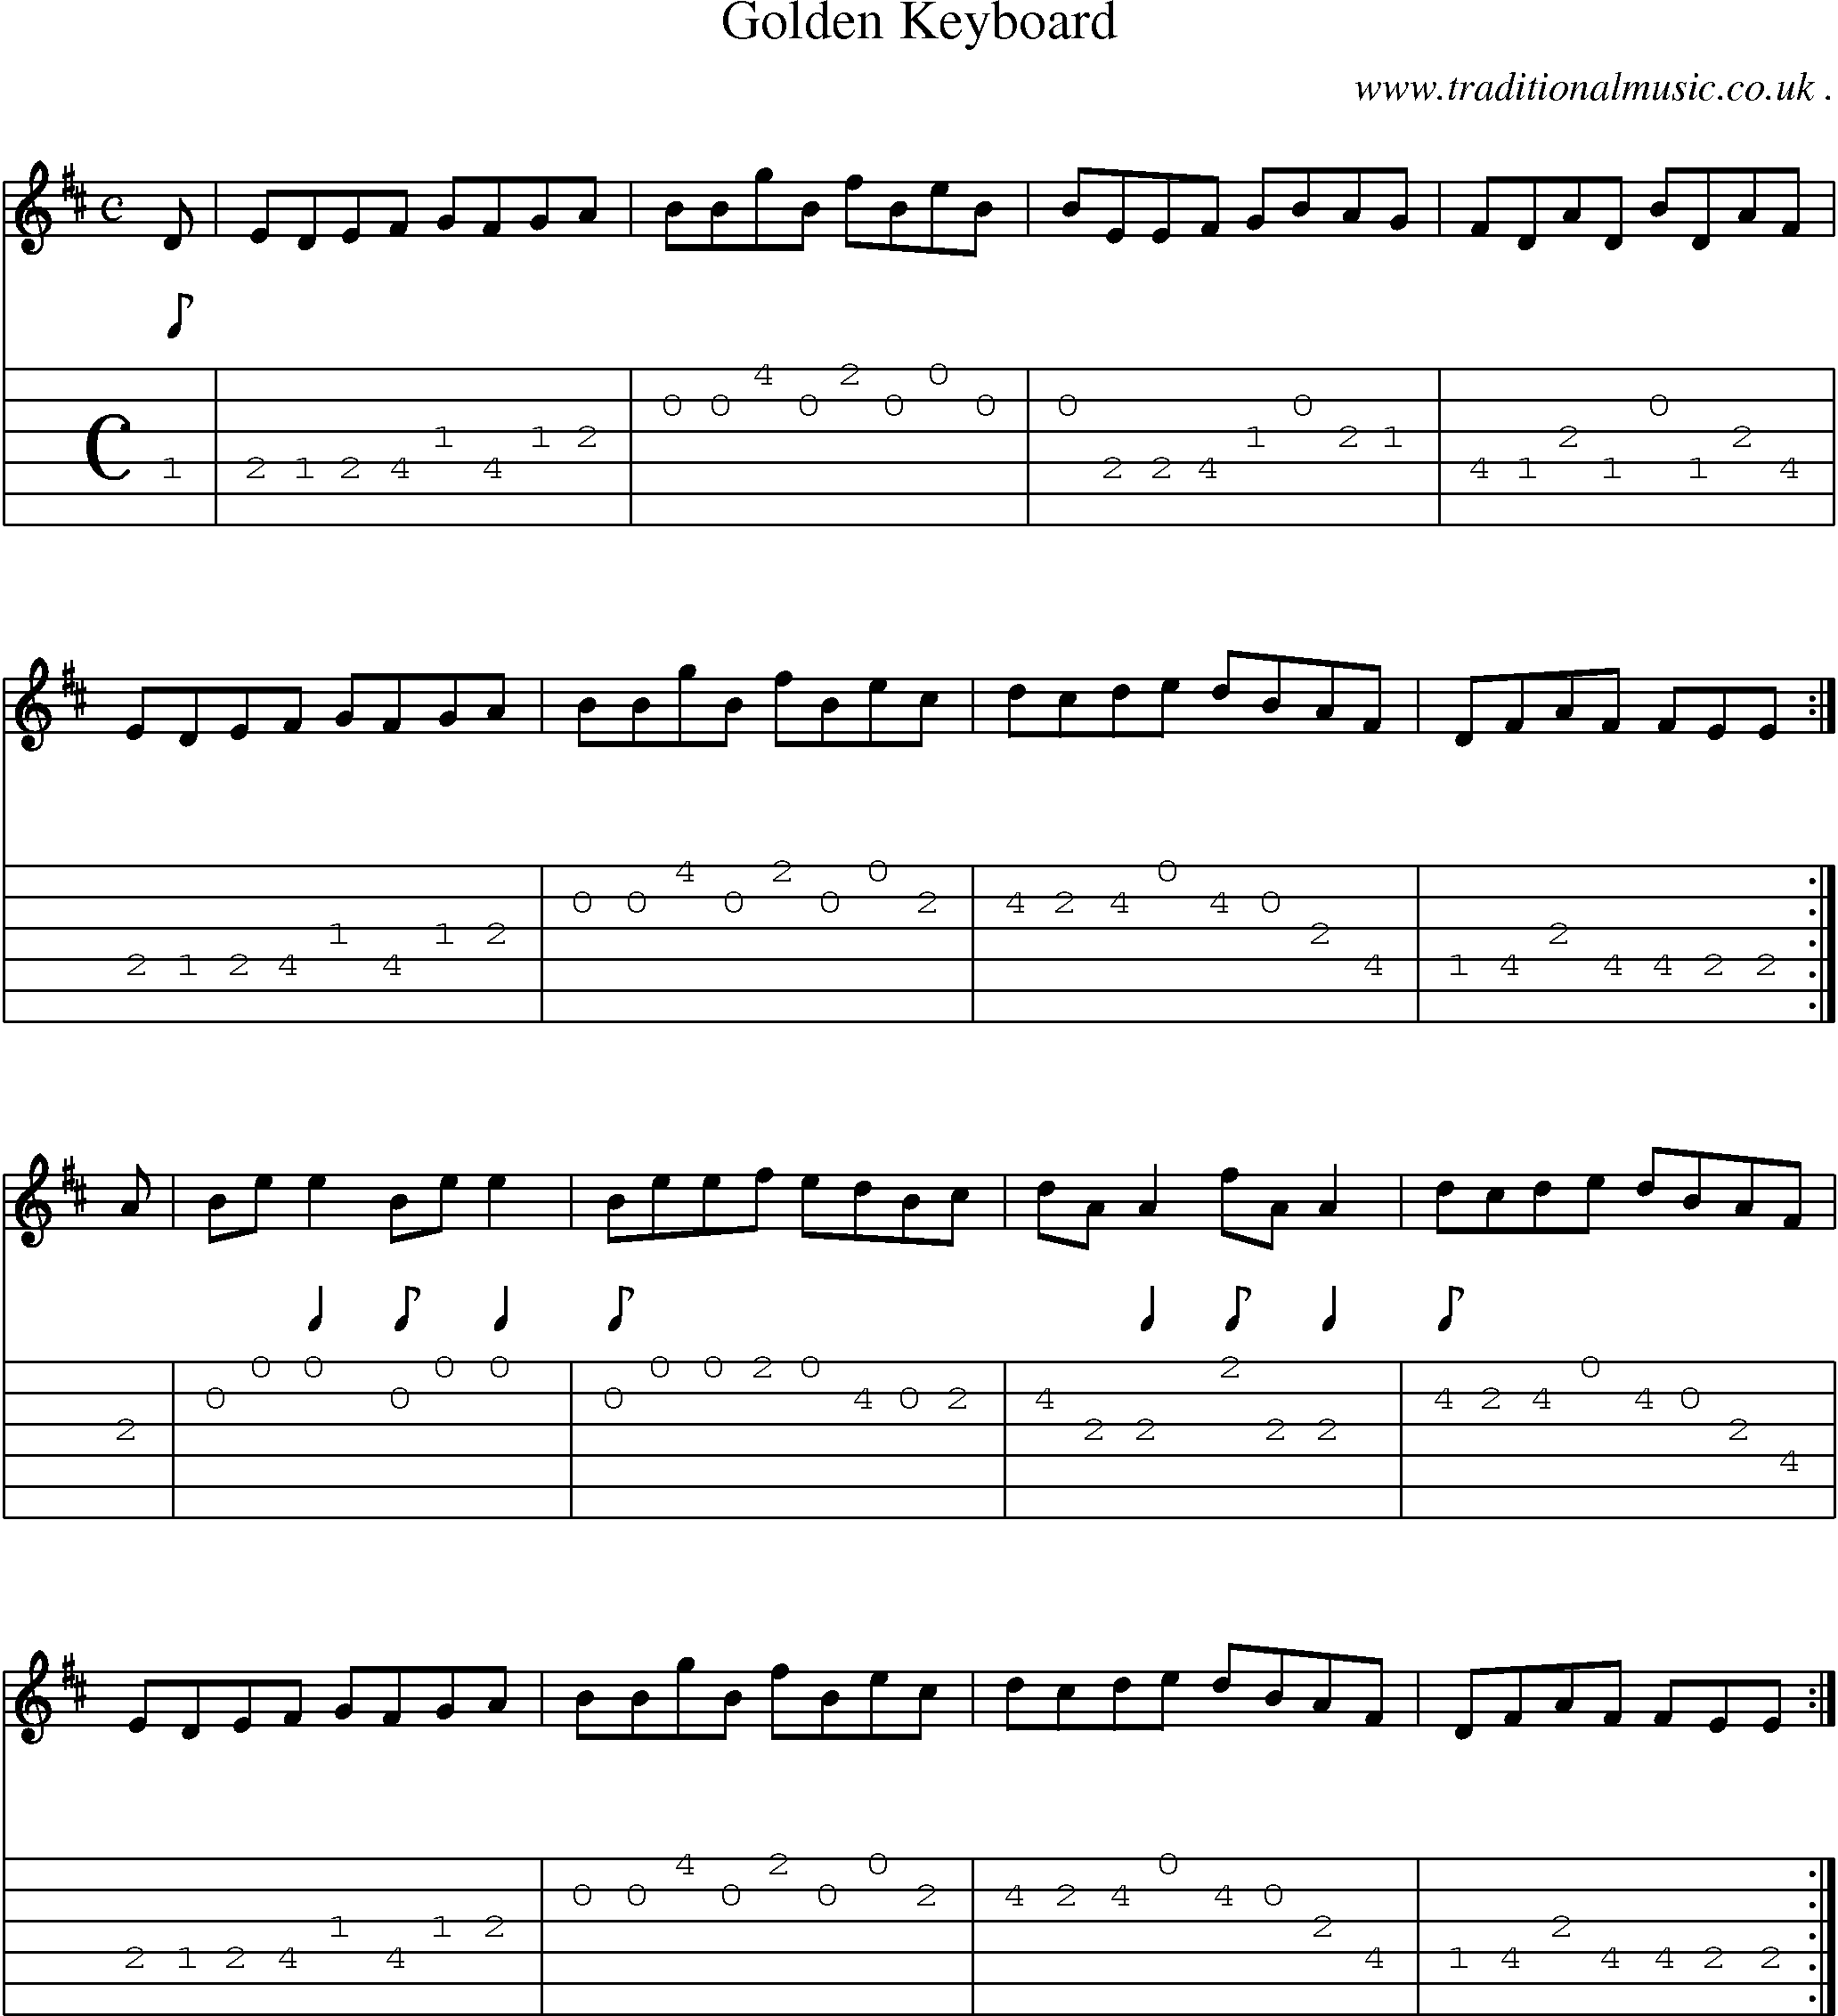 Sheet-Music and Guitar Tabs for Golden Keyboard